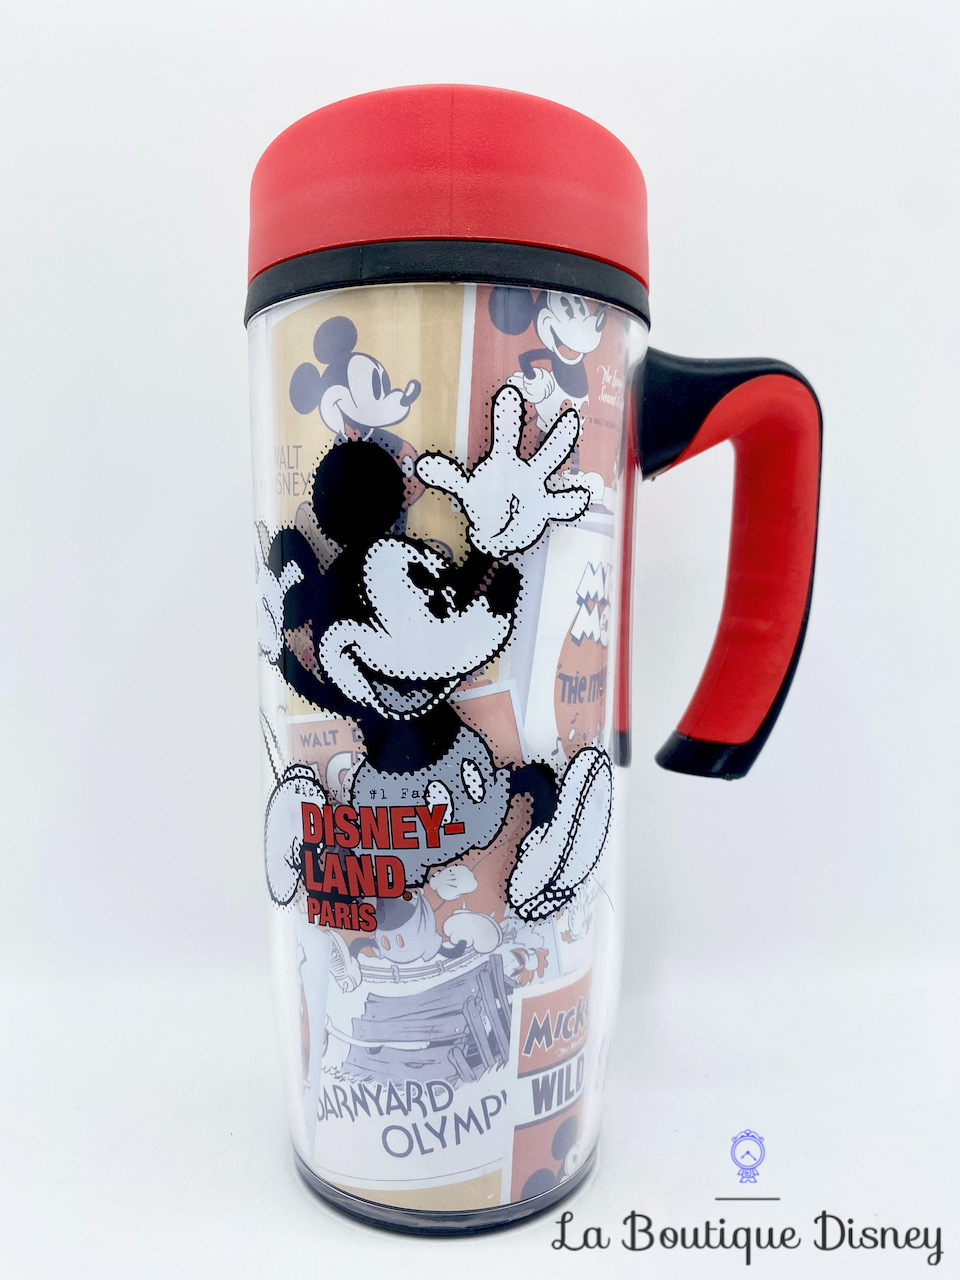 thermos-mickey-mouse-oh-boy-mouse-party-vip-disneyland-paris-mug-voyage-disney-rouge-1